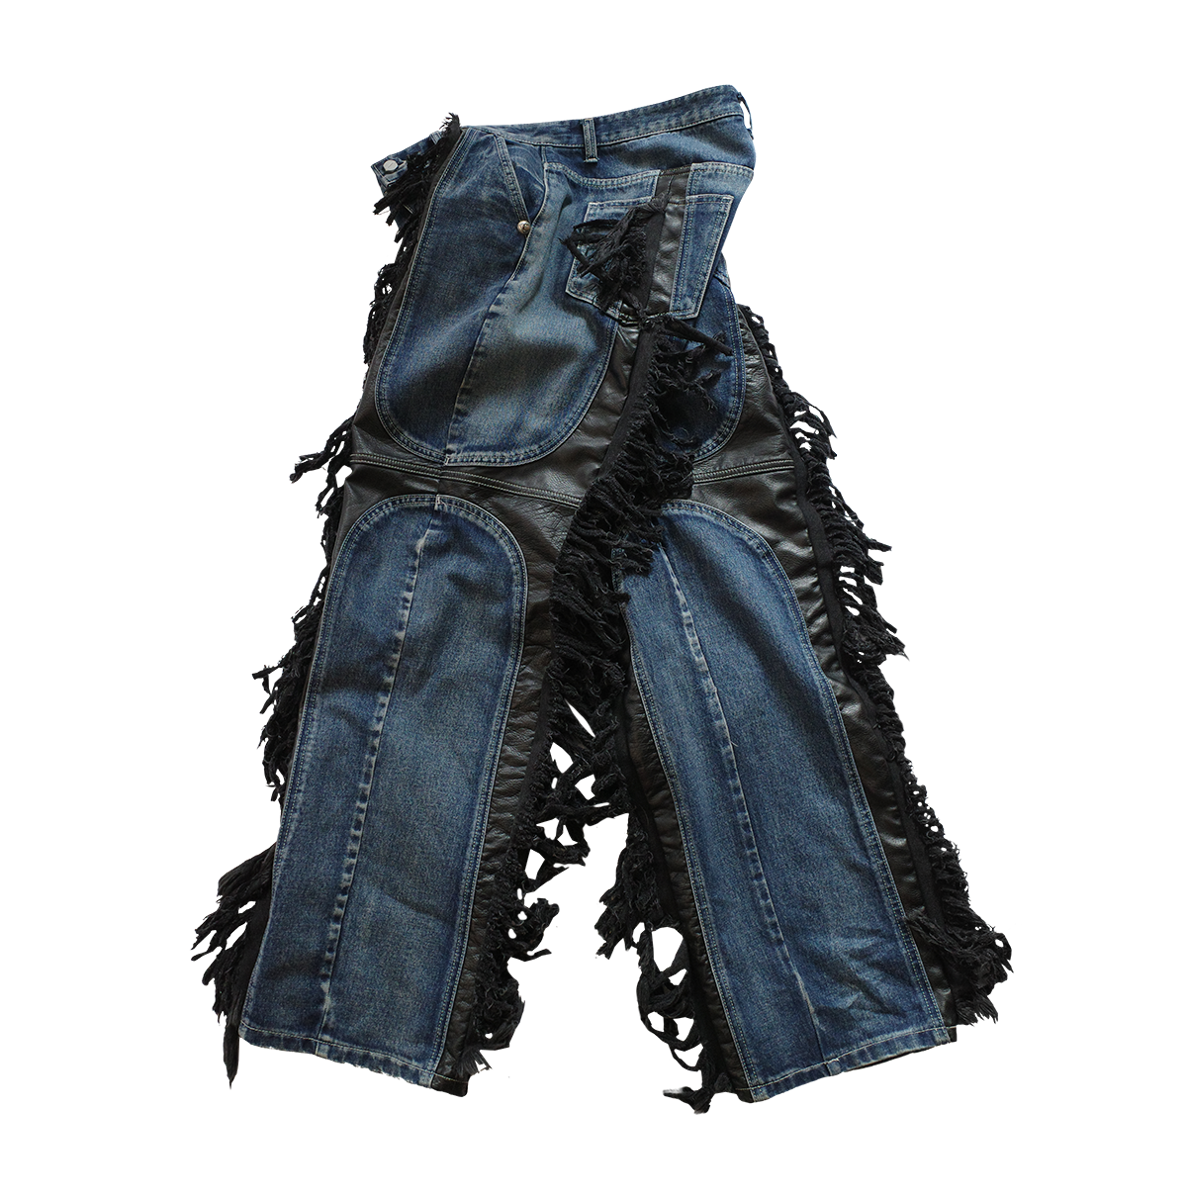 Mohican Leather Denim Pants